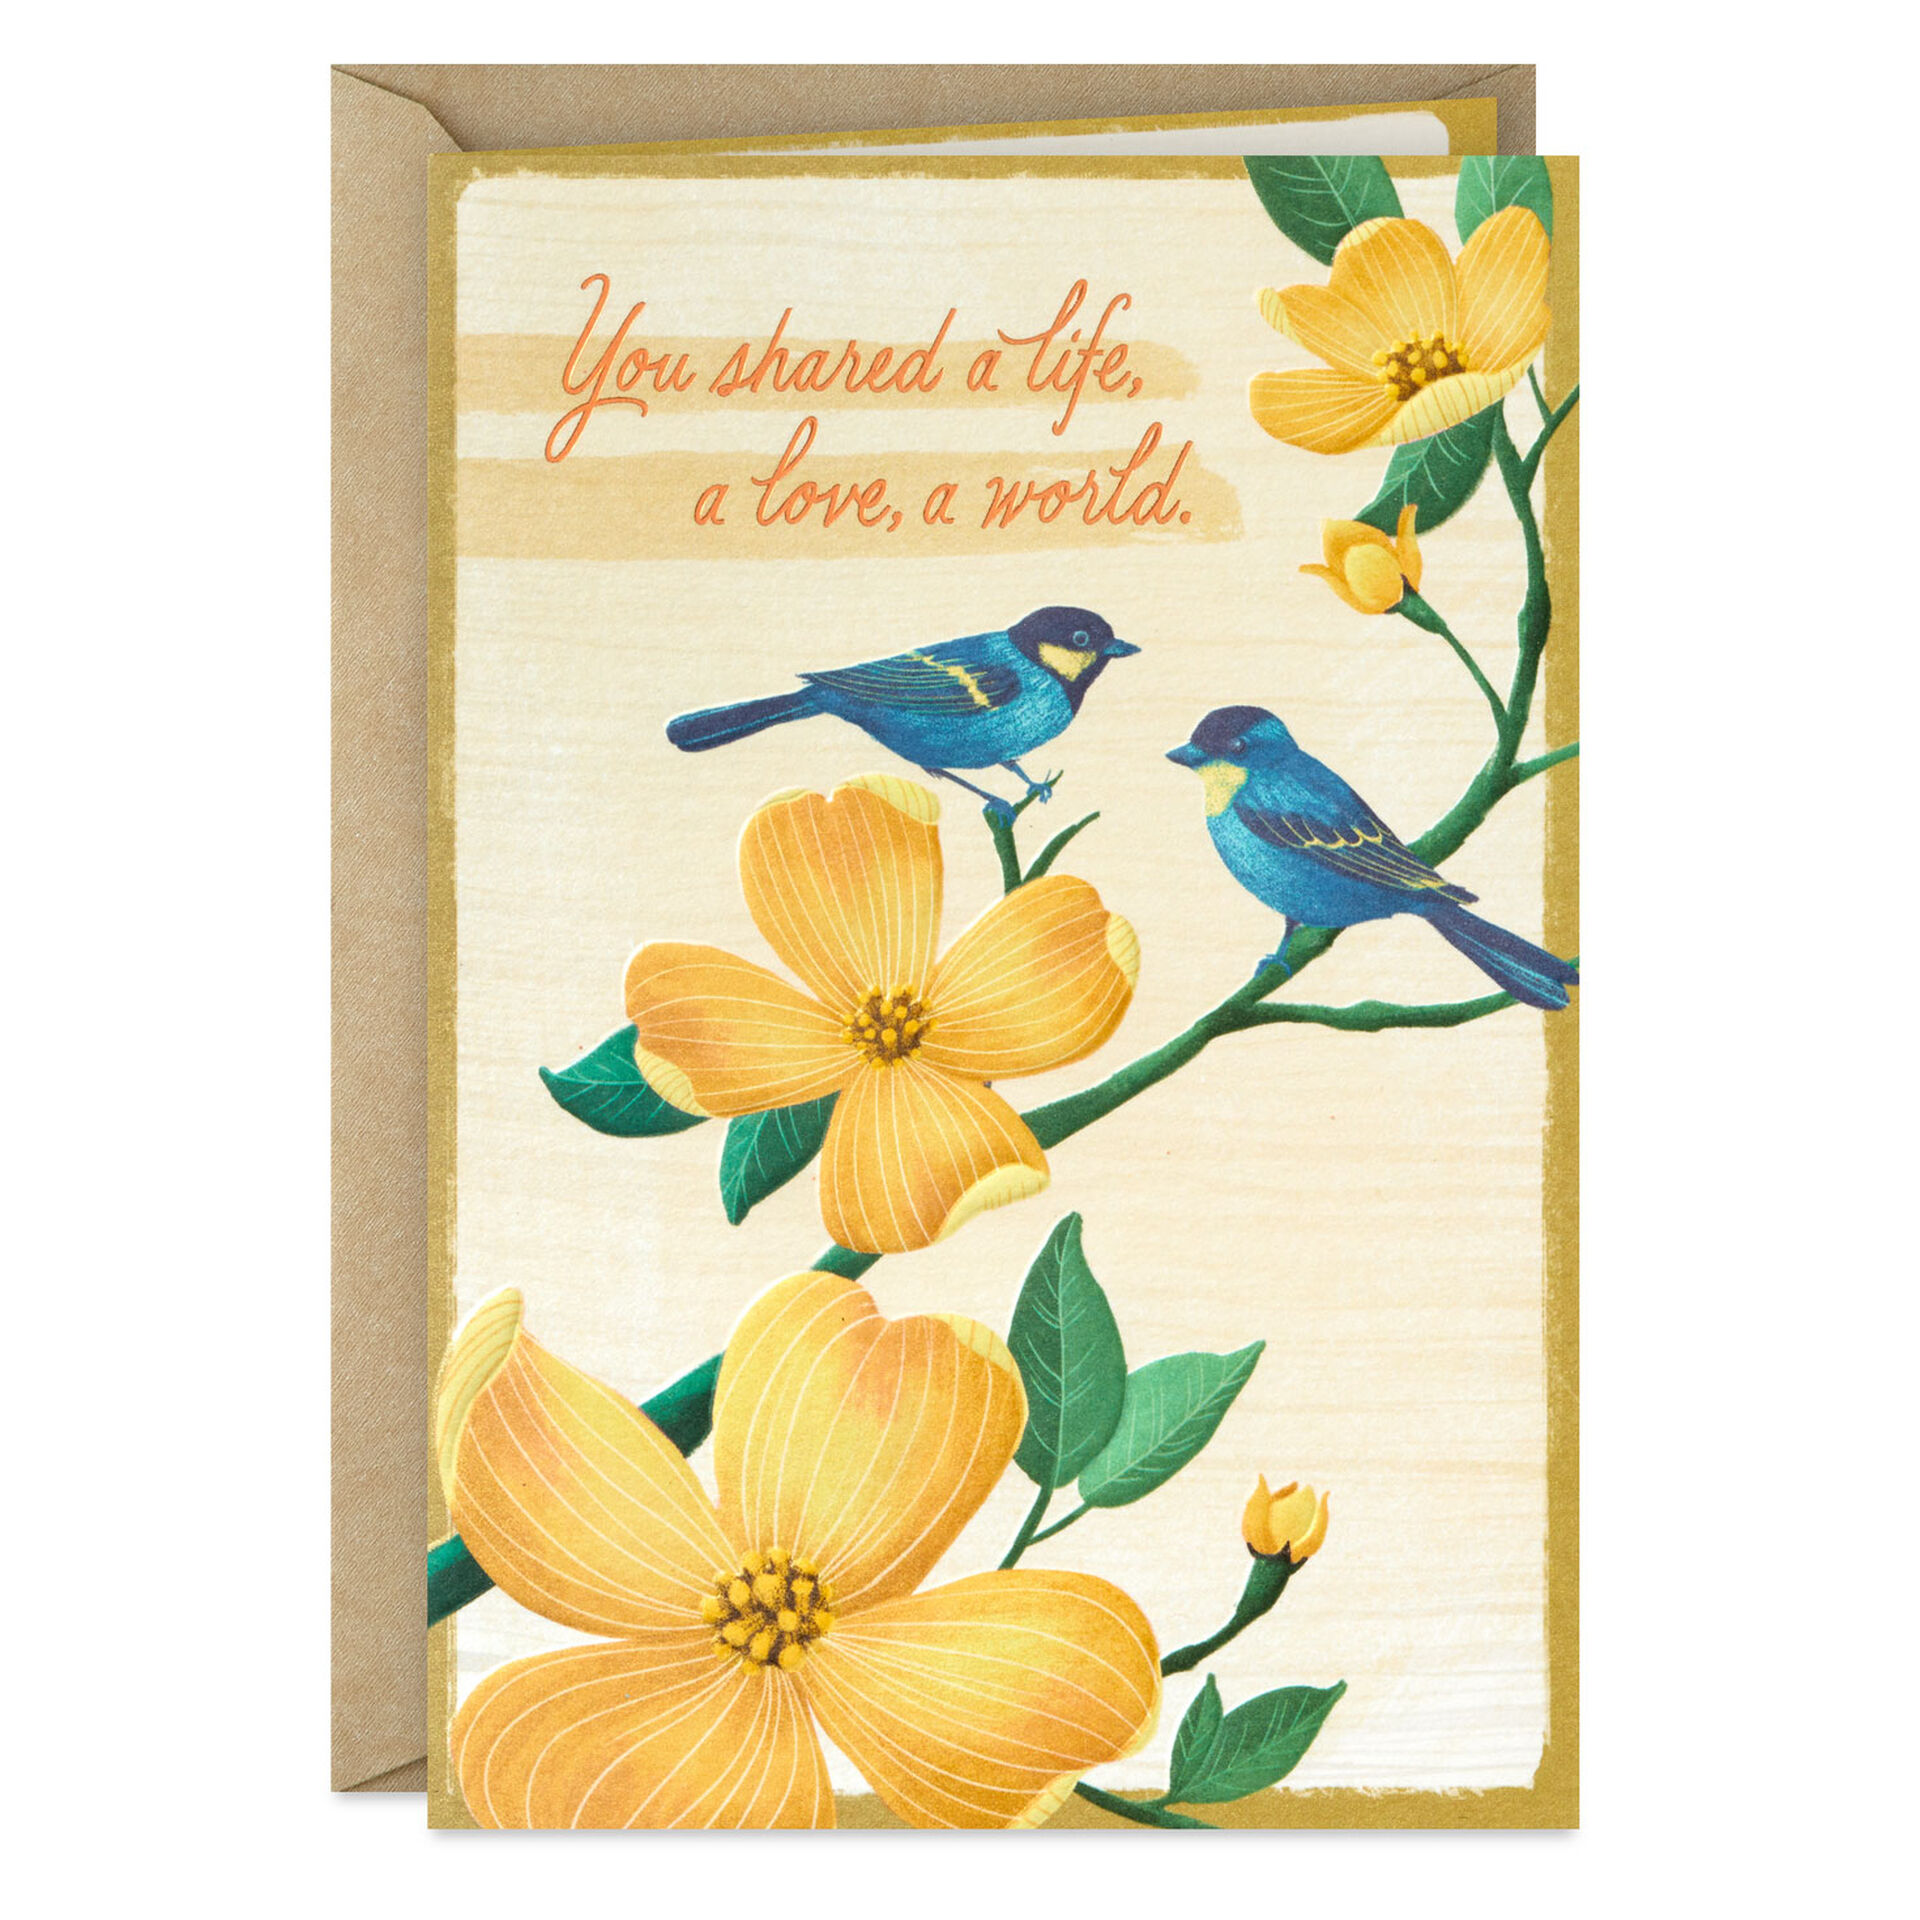 Birds-and-Flowers-Sympathy-Card-for-Loss-of-Spouse_399S9519_01